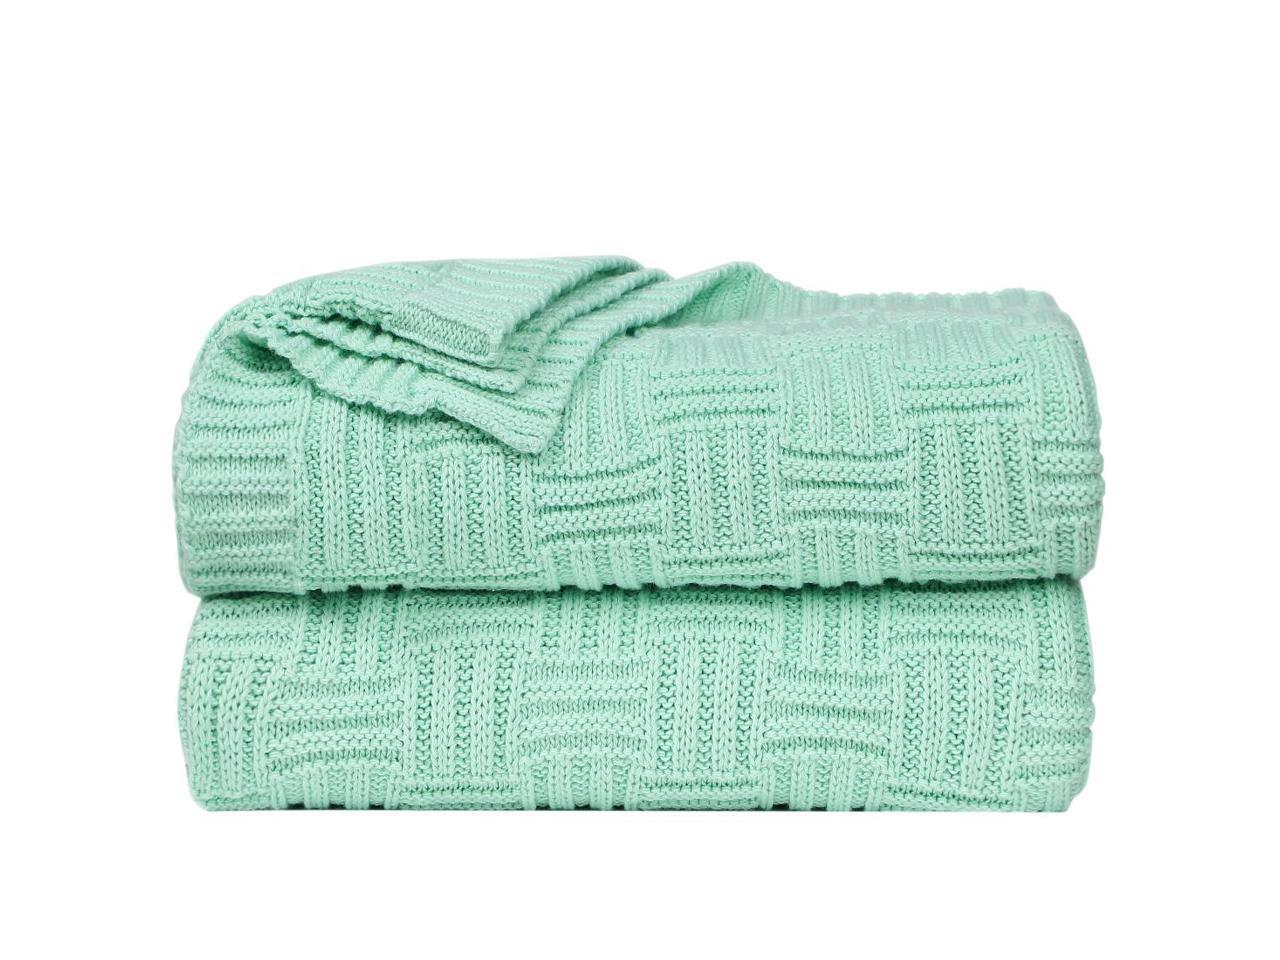 Knitted Throw Blanket for Sofa and Couch,Soft 100% Cotton Home  Blanket,Lightweight Cable Cross Knit Blanket - Light Green, 50